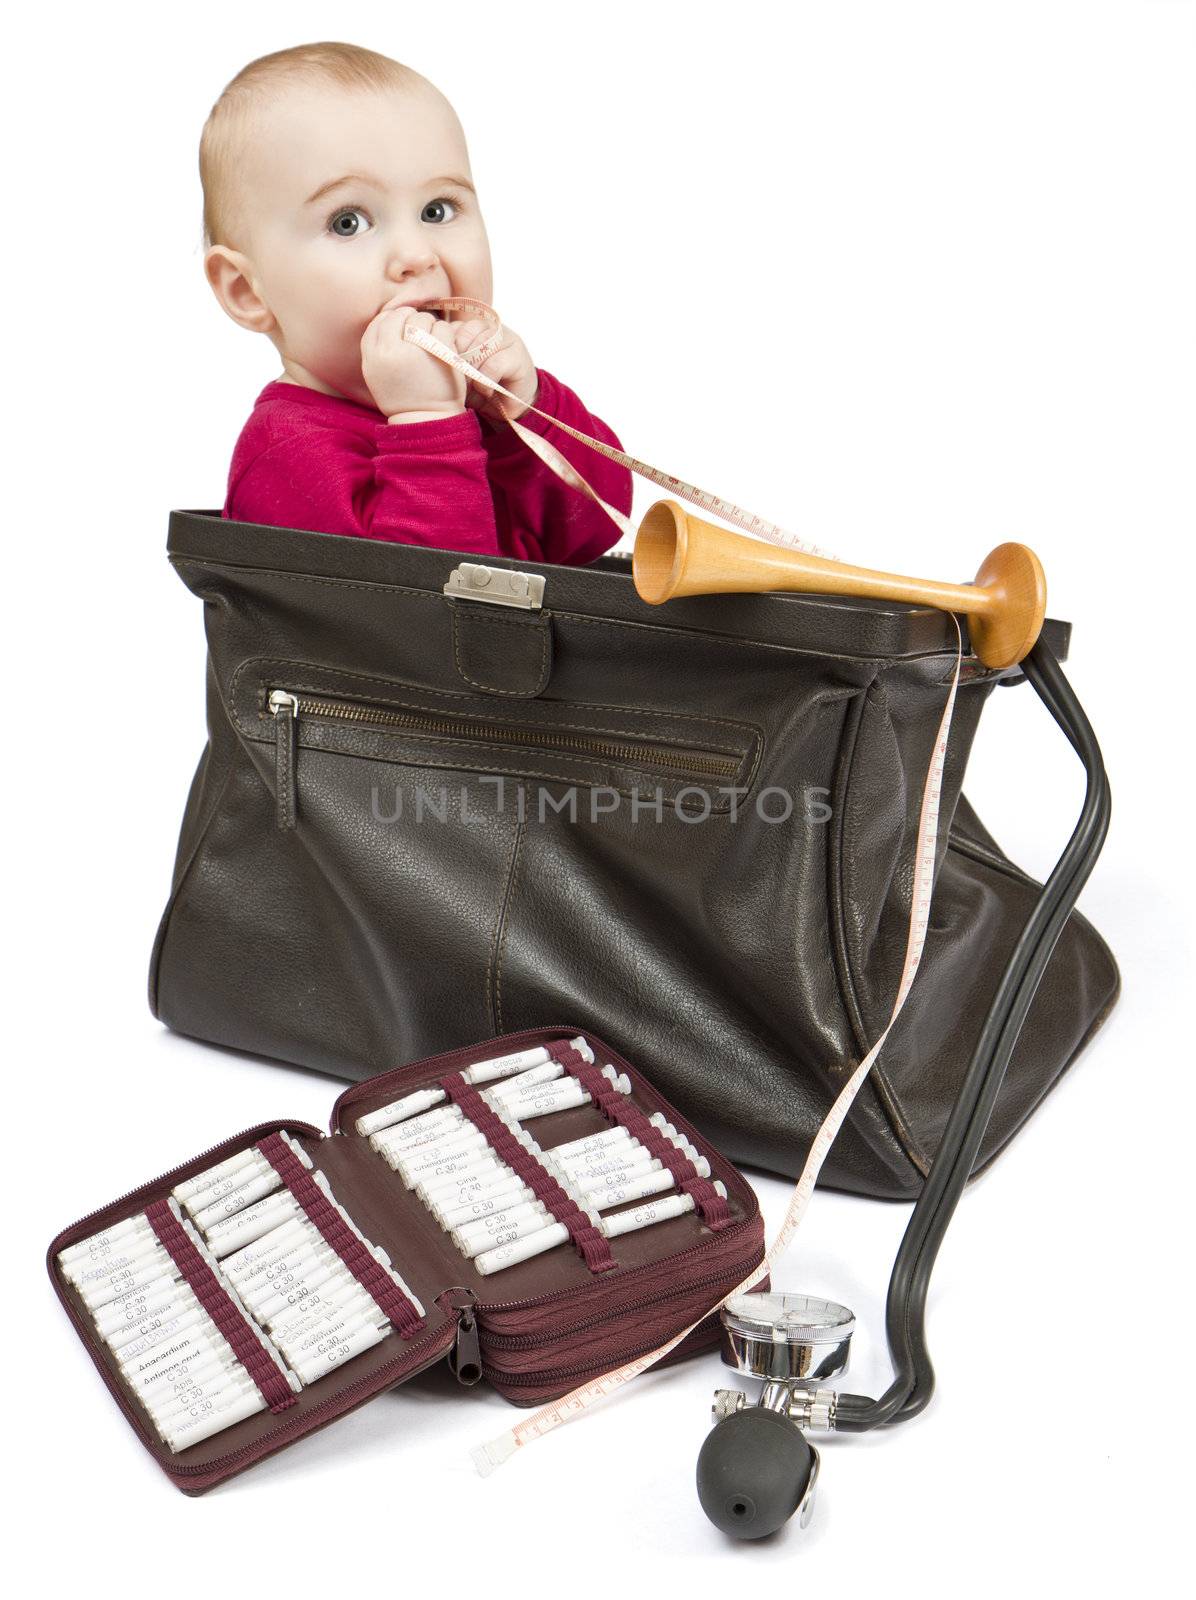 young child sitting in midwifes case with homeopathic globule , ear trumpet and measuring tape. No product names, just common names of homeopathic medicine.